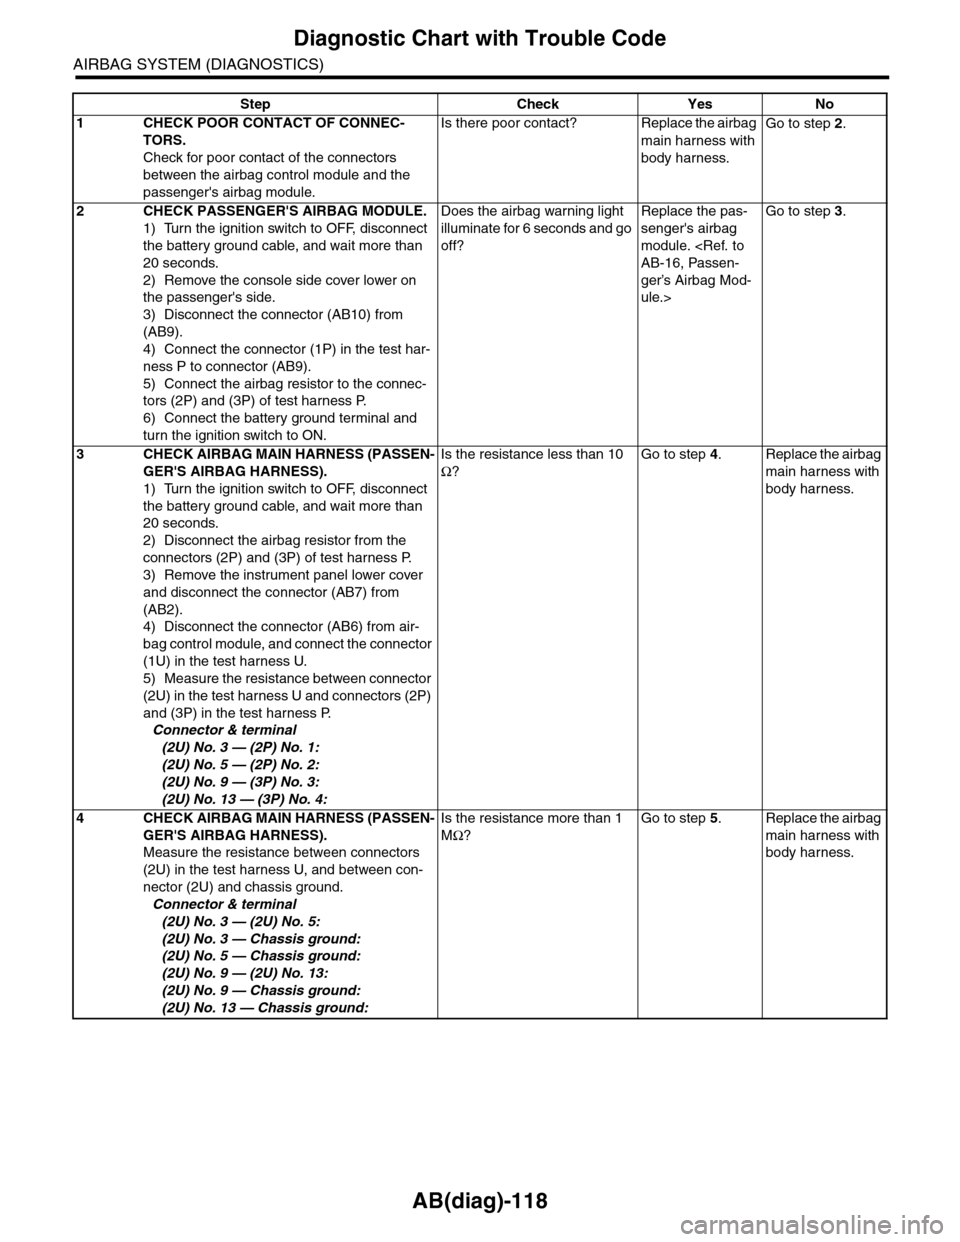 SUBARU TRIBECA 2009 1.G Service Service Manual AB(diag)-118
Diagnostic Chart with Trouble Code
AIRBAG SYSTEM (DIAGNOSTICS)
Step Check Yes No
1CHECK POOR CONTACT OF CONNEC-
TORS.
Check for poor contact of the connectors 
between the airbag control 